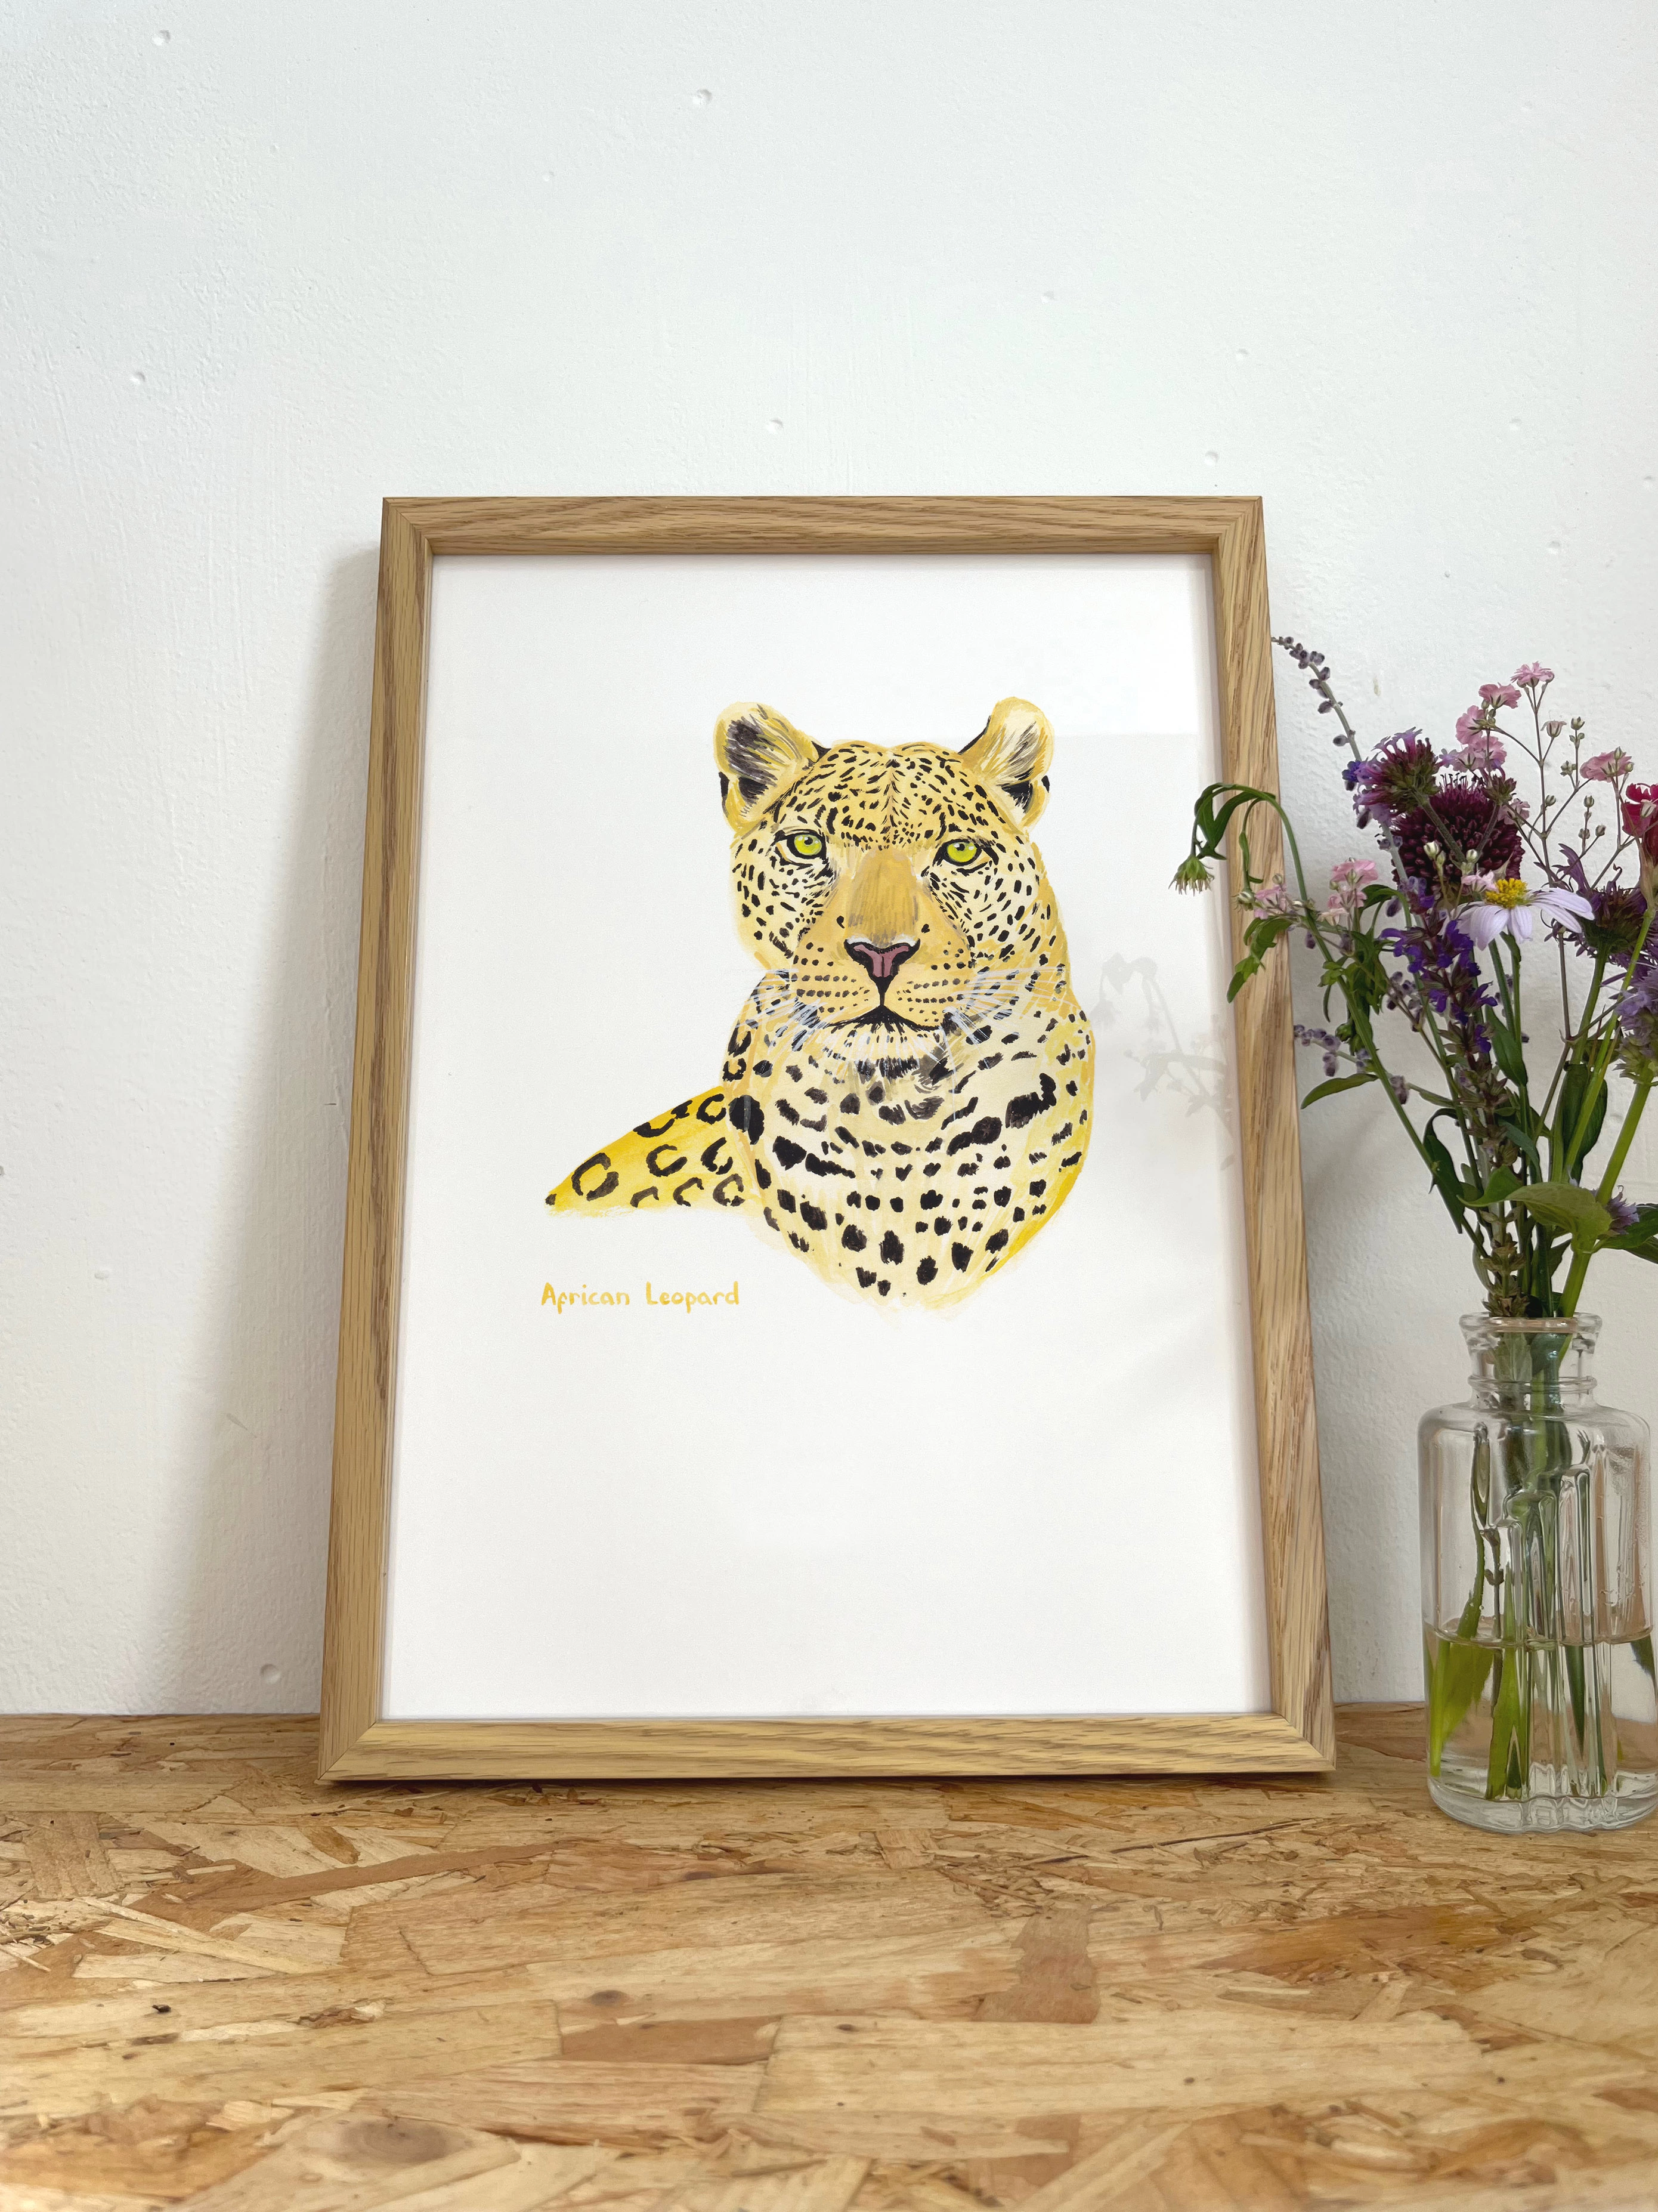 A print of an illustrated head and chest of an African Leopard in a frame next to some flowers